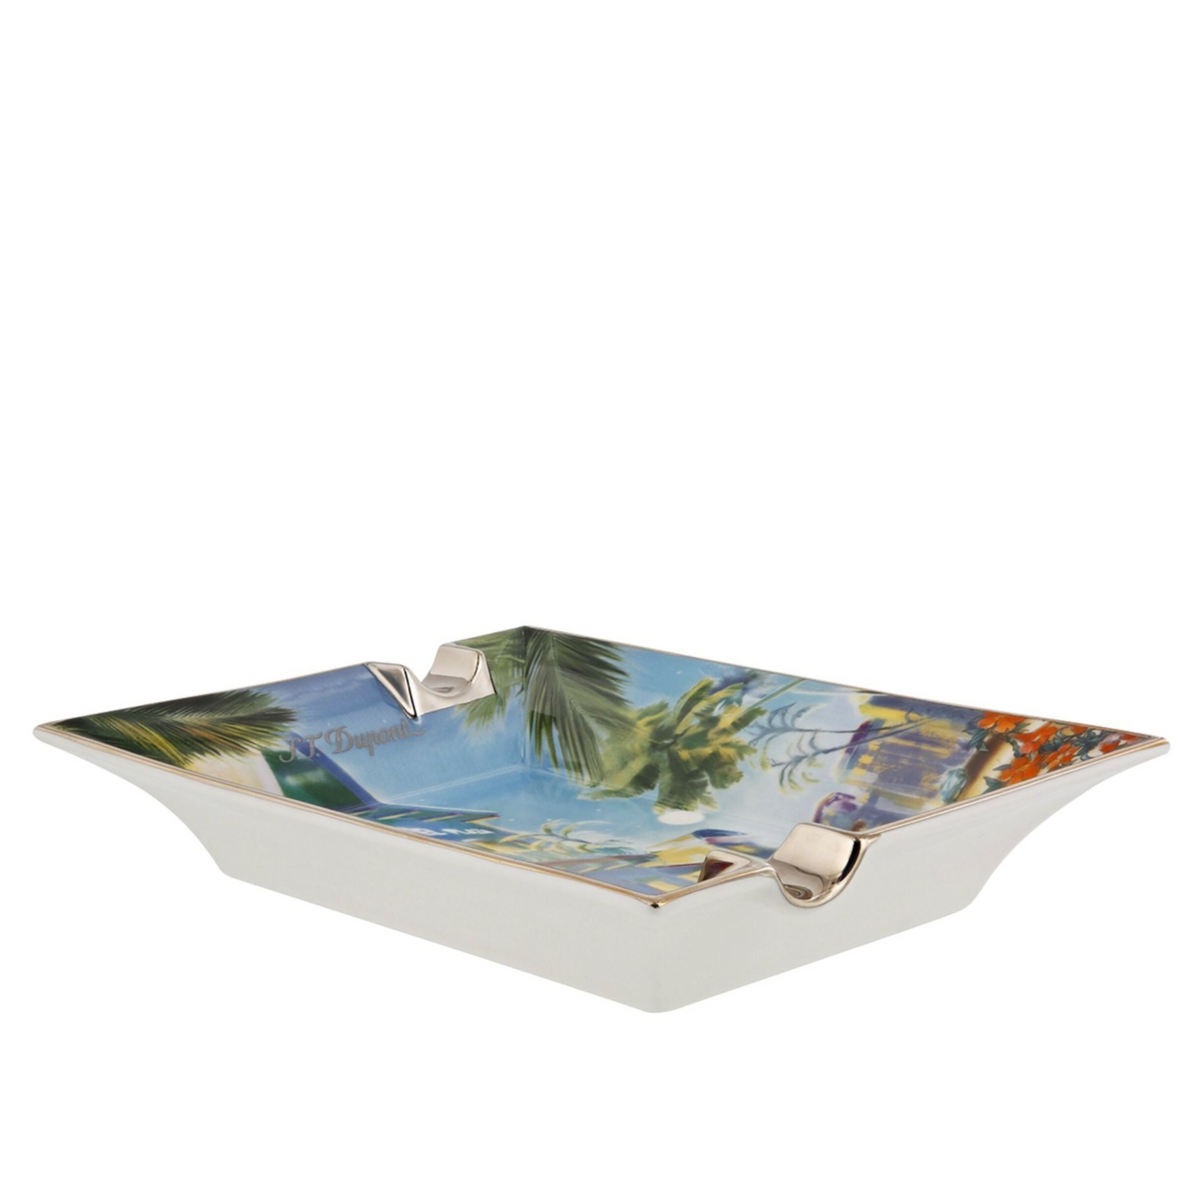 A rectangular porcelain ashtray from KirbyAllison.com, measuring H4cm x W22cm x D17cm approx., with a tropical island design and two cigar grooves for holding cigarettes.